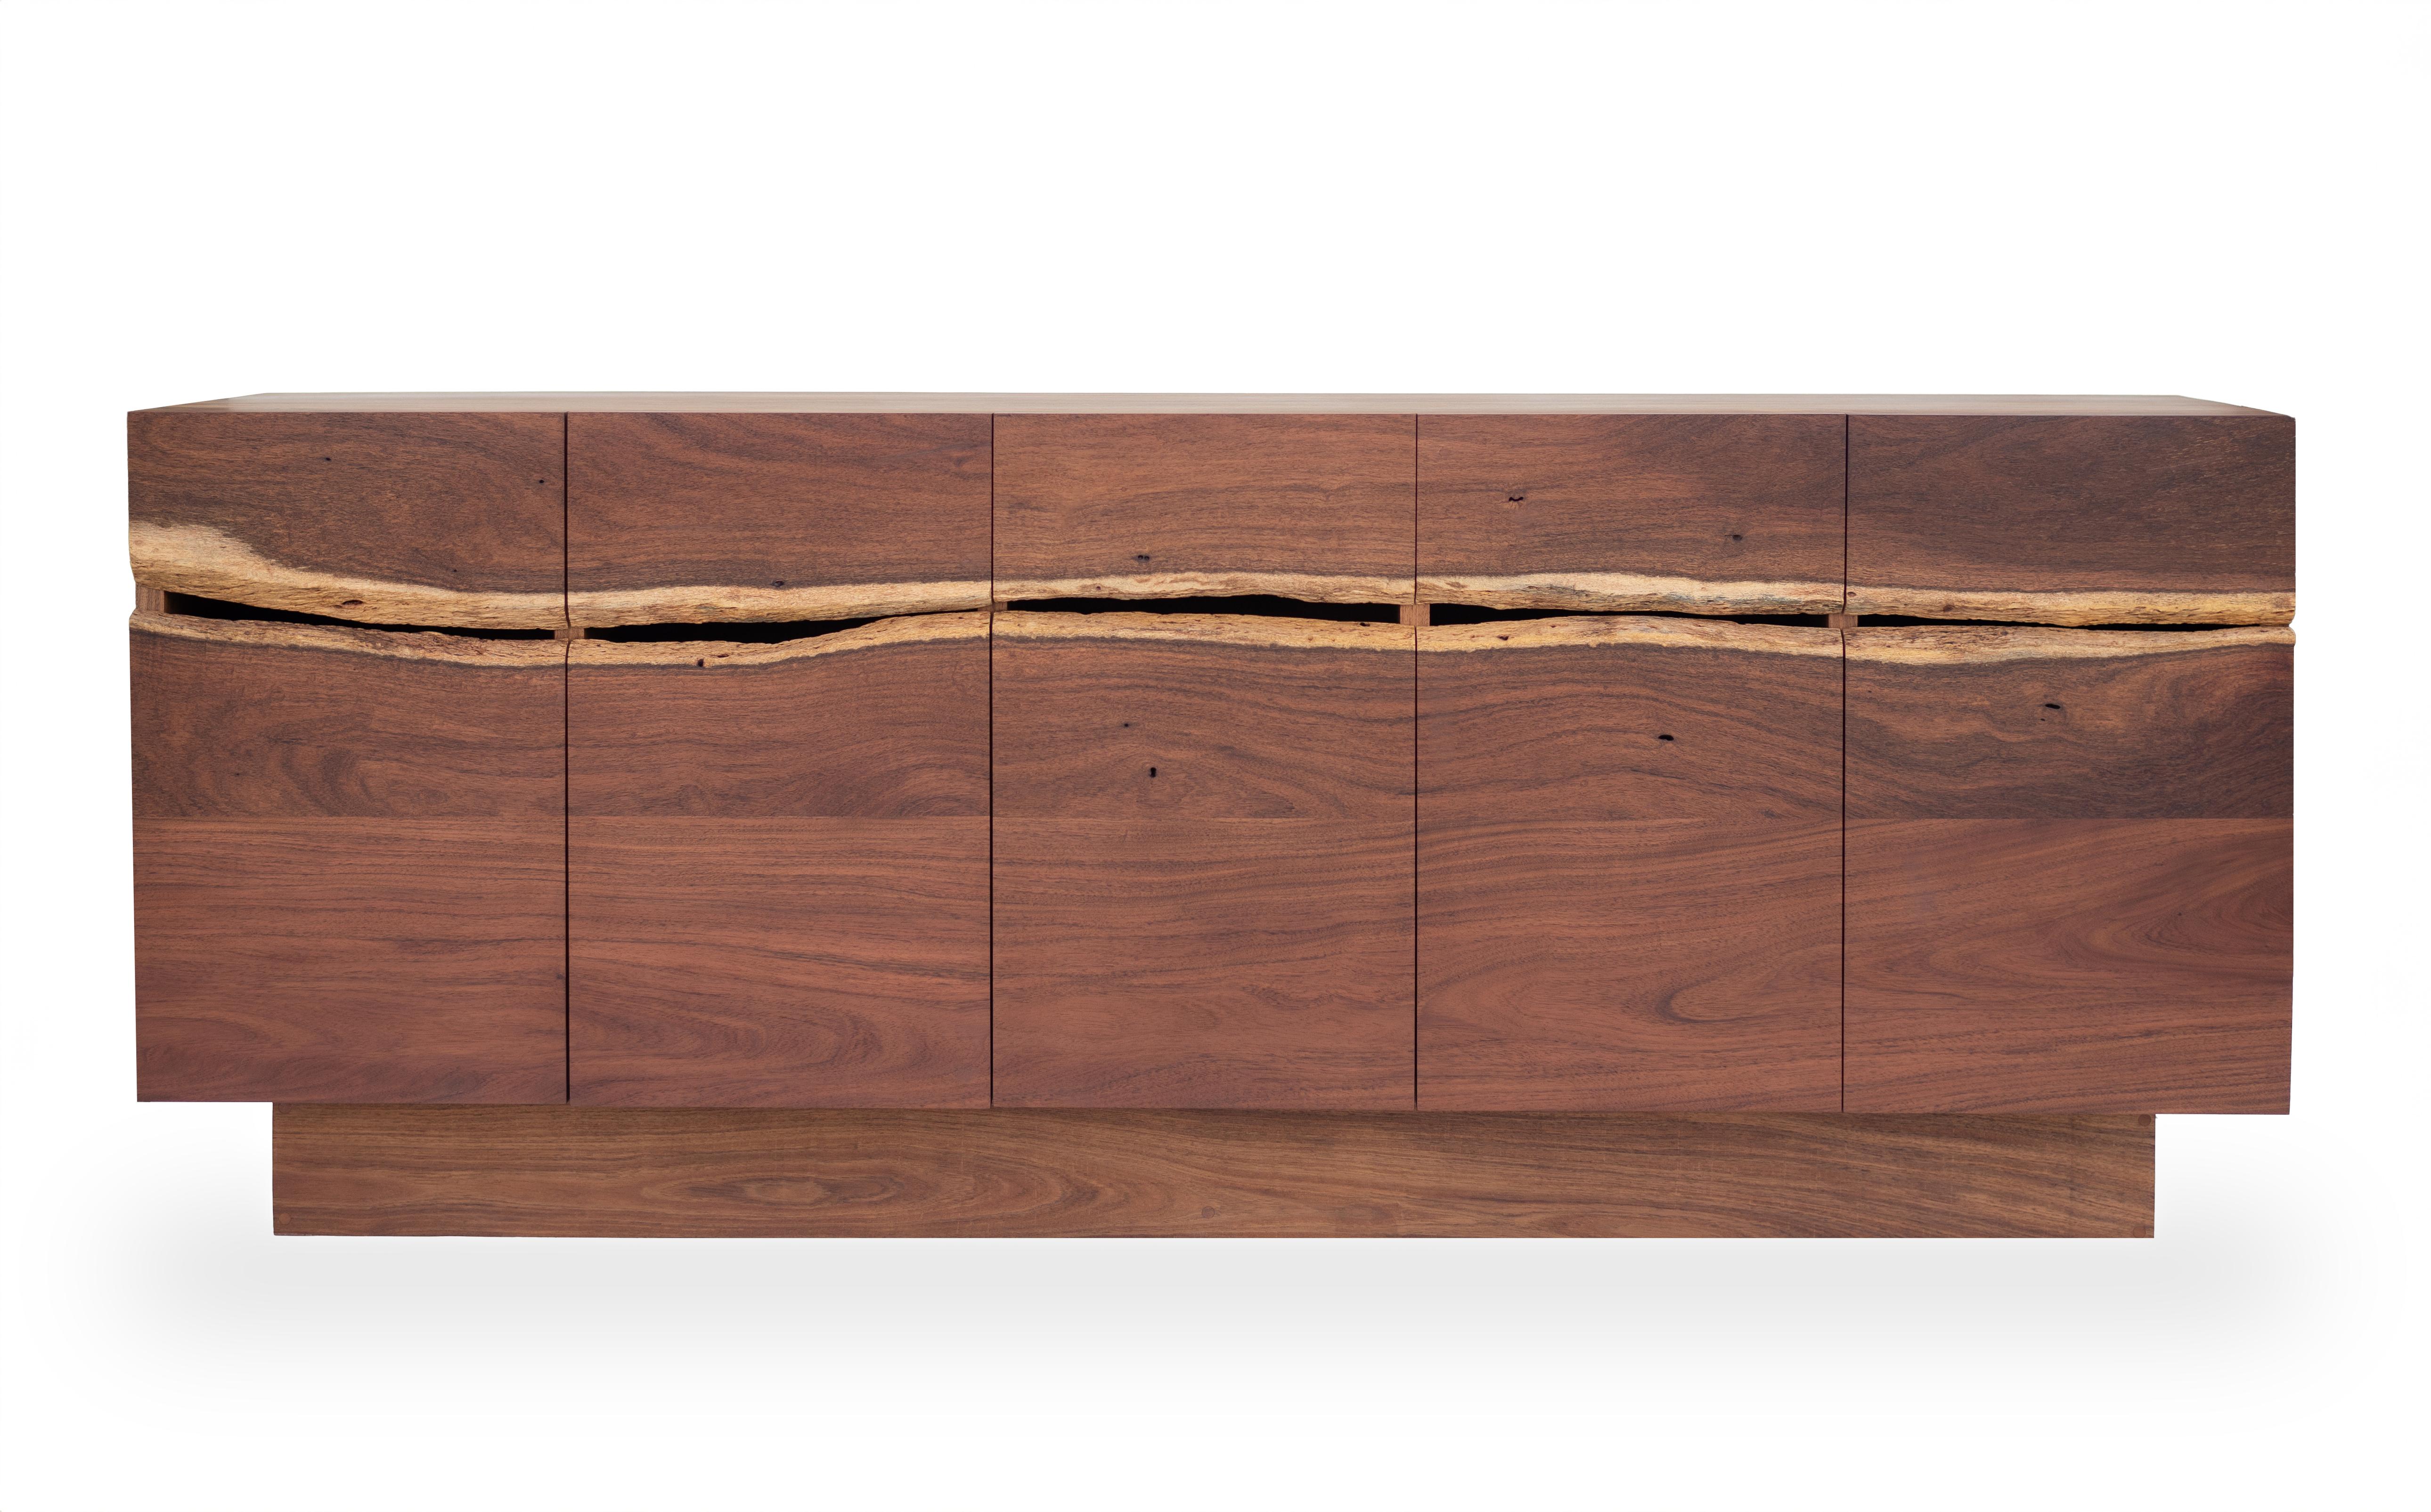 A credenza with a front crafted from two planks with natural edges of Caribbean Walnut wood. 
The design of this piece aims to highlight the beauty of tropical wood in its natural state, with extraordinary organic aspects crafted with the utmost